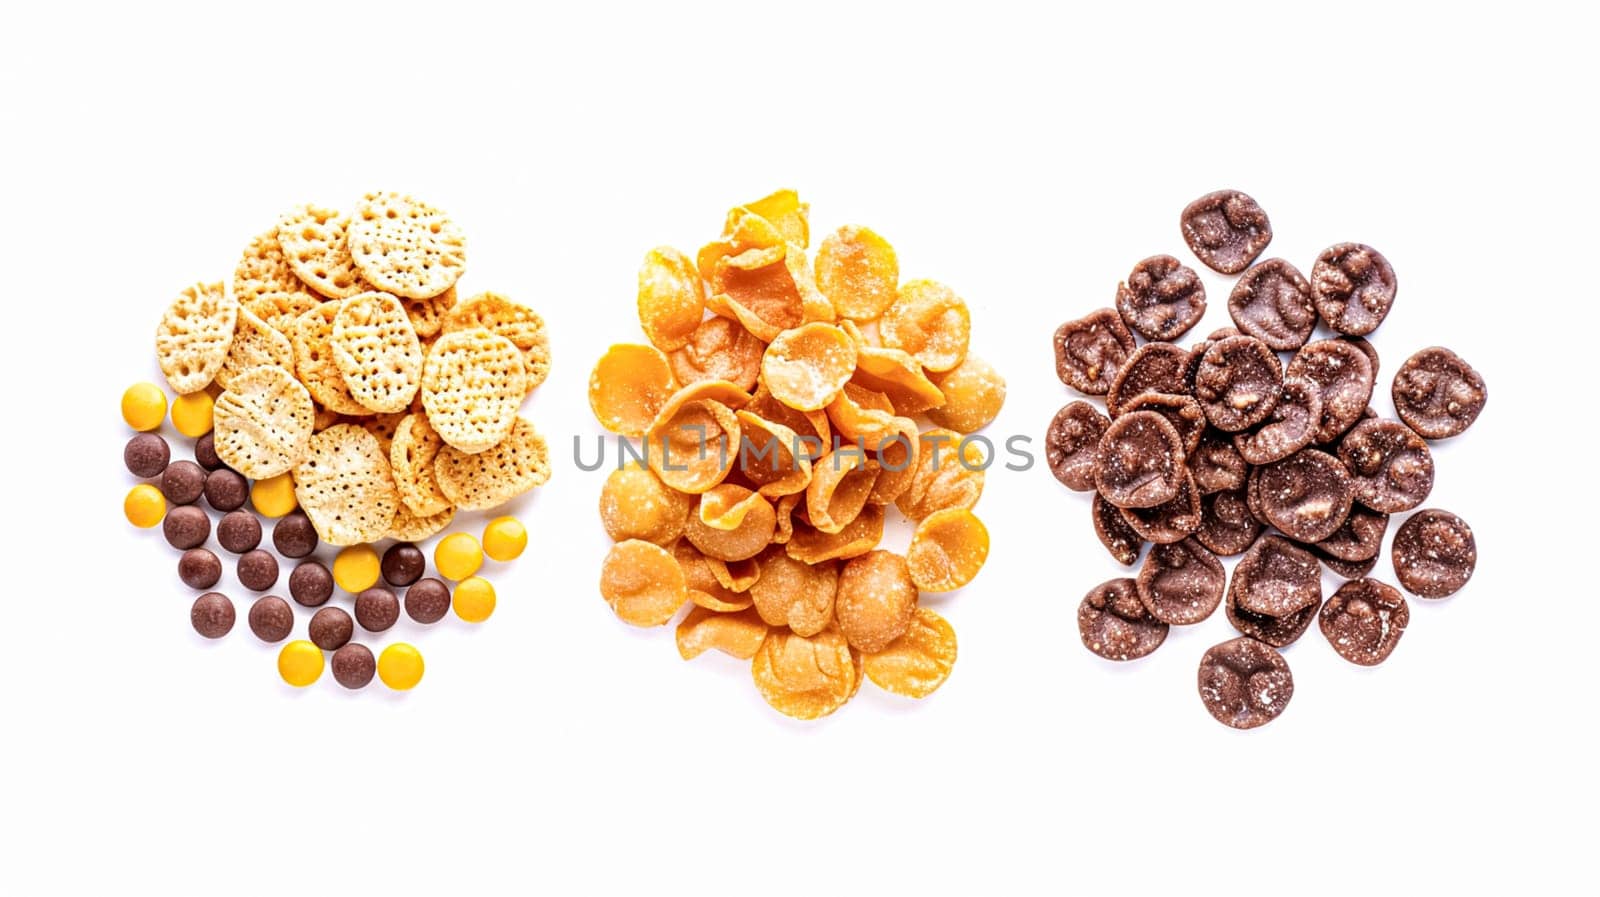 Assortment of cereal, grains, muesli or oats for healthy breakfast, organic farm market product isolated on white background